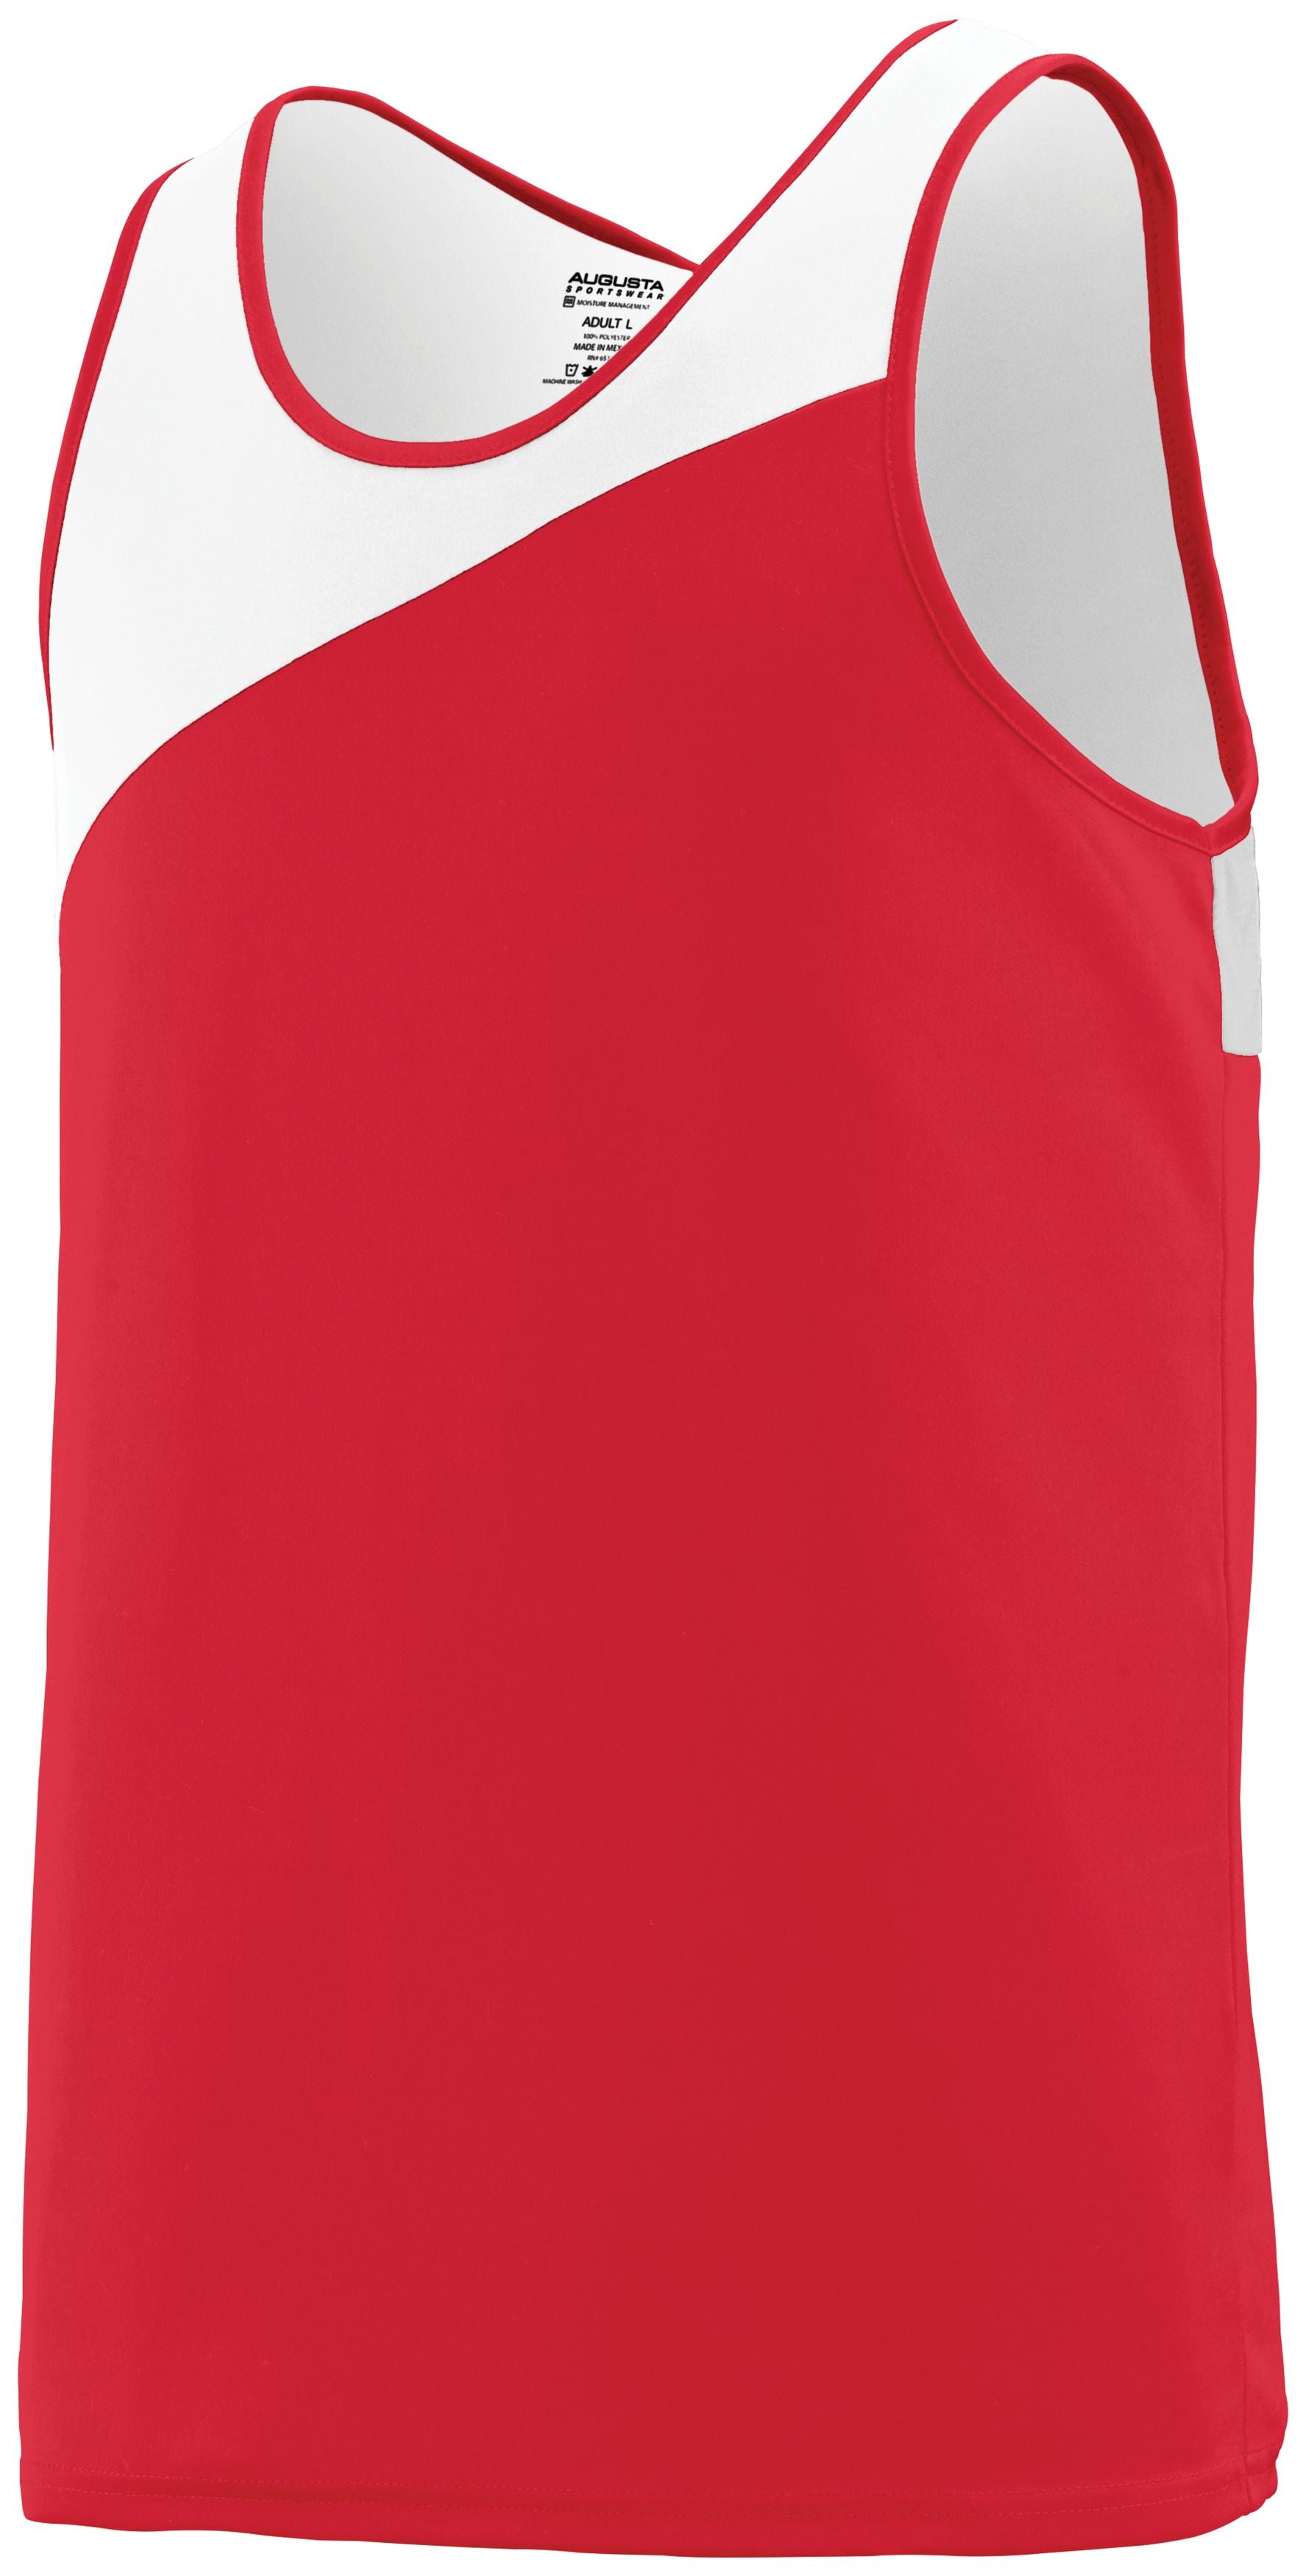 Augusta Sportswear Accelerate Jersey in Red/White  -Part of the Adult, Adult-Jersey, Augusta-Products, Track-Field, Shirts product lines at KanaleyCreations.com